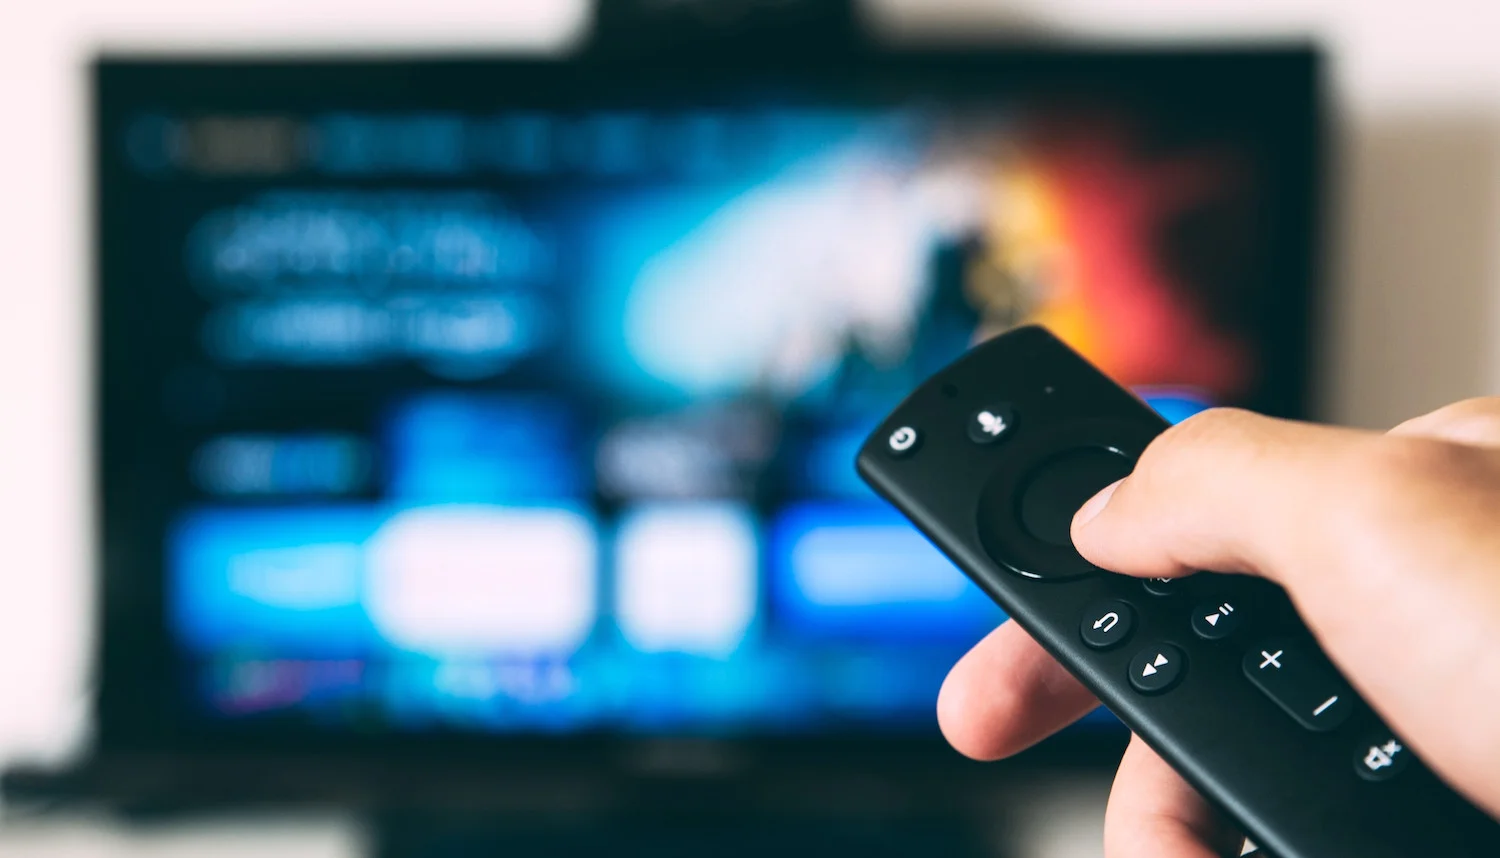 CRTC sets threshold for streaming services subject to Bill C-11